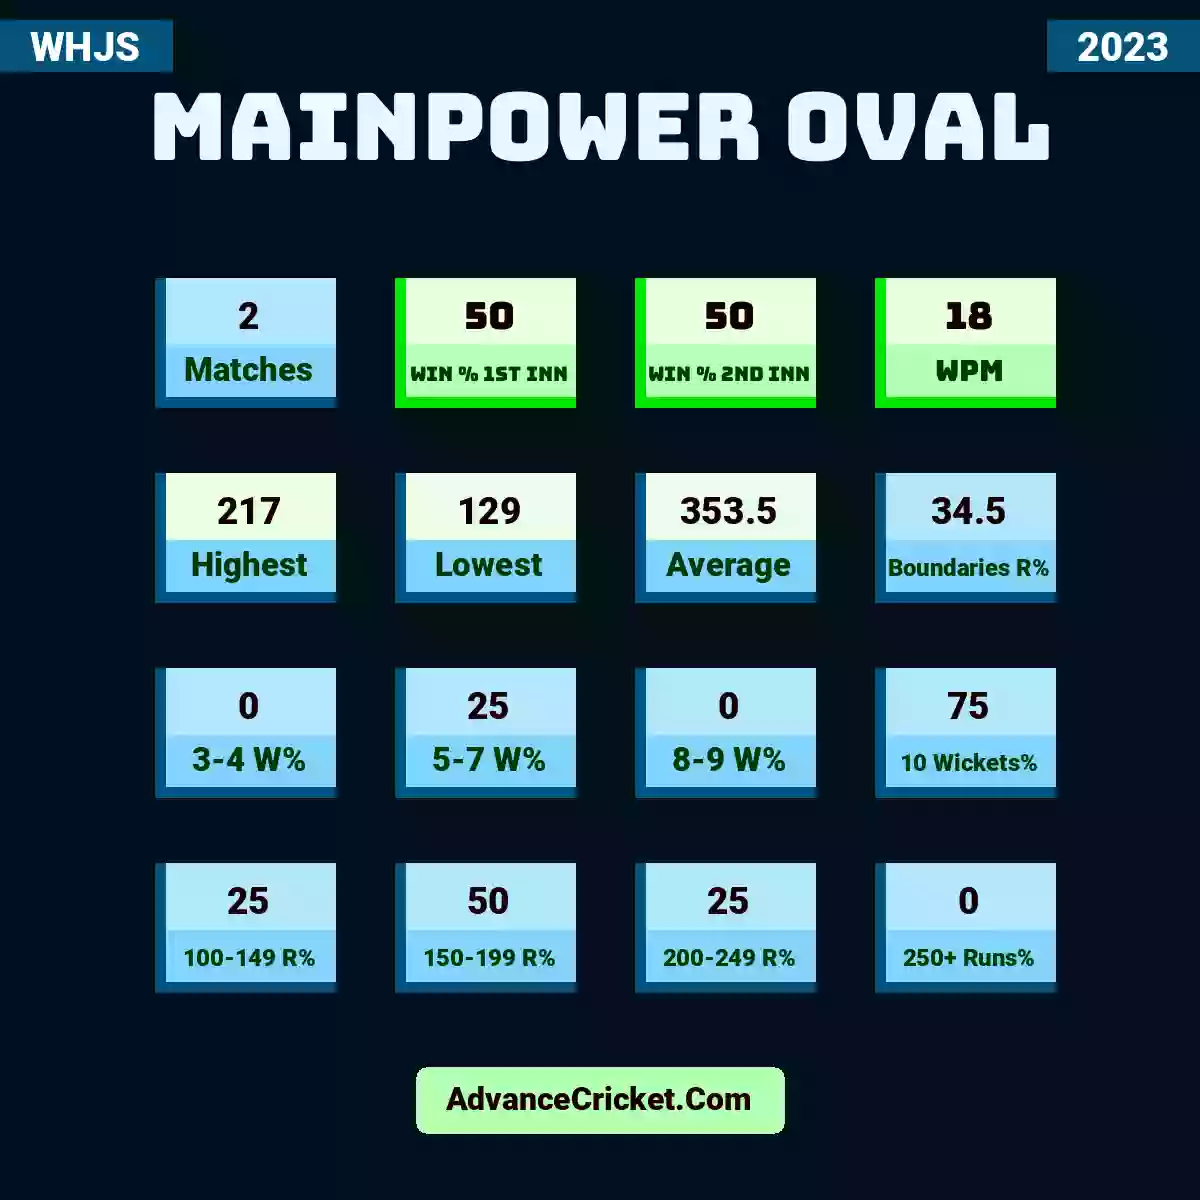 Image showing Mainpower Oval with Matches: 2, Win % 1st Inn: 50, Win % 2nd Inn: 50, WPM: 18, Highest: 217, Lowest: 129, Average: 353.5, Boundaries R%: 34.5, 3-4 W%: 0, 5-7 W%: 25, 8-9 W%: 0, 10 Wickets%: 75, 100-149 R%: 25, 150-199 R%: 50, 200-249 R%: 25, 250+ Runs%: 0.